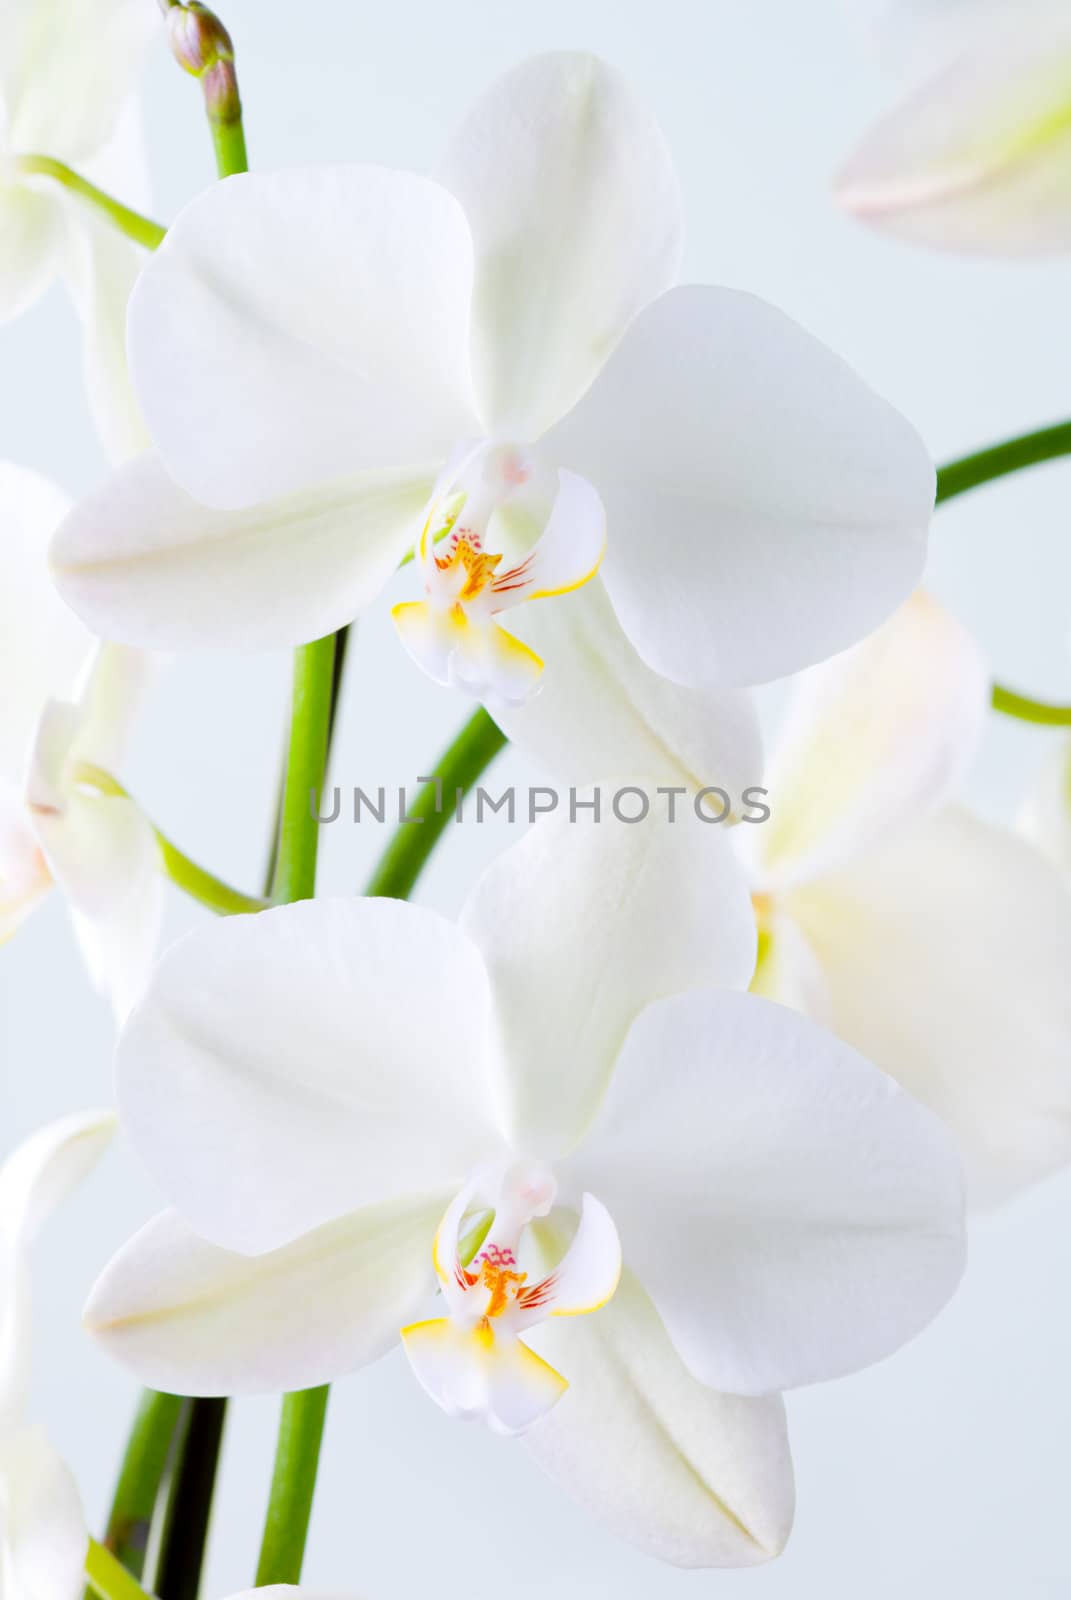 Orchid flowers - shallow depth of field.